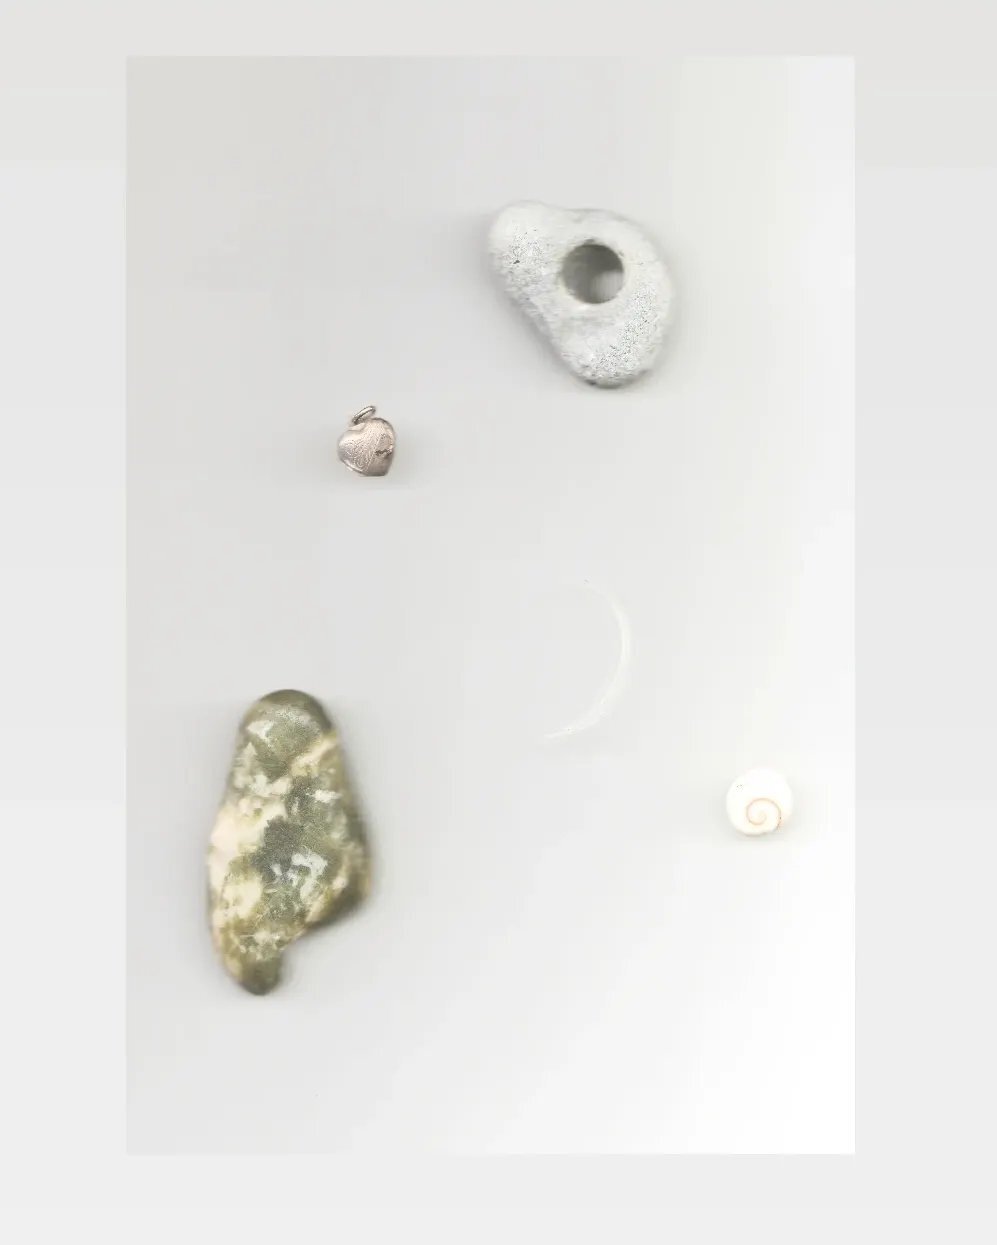 1. Things found in and from Scotland: hag stone found on a beach on the Isle of Iona in the last few days we were there, a wee spiral seashell, a lock of my grandmother's hair shaped liked a crescent moon, a small heart shaped locket, Iona marble gif